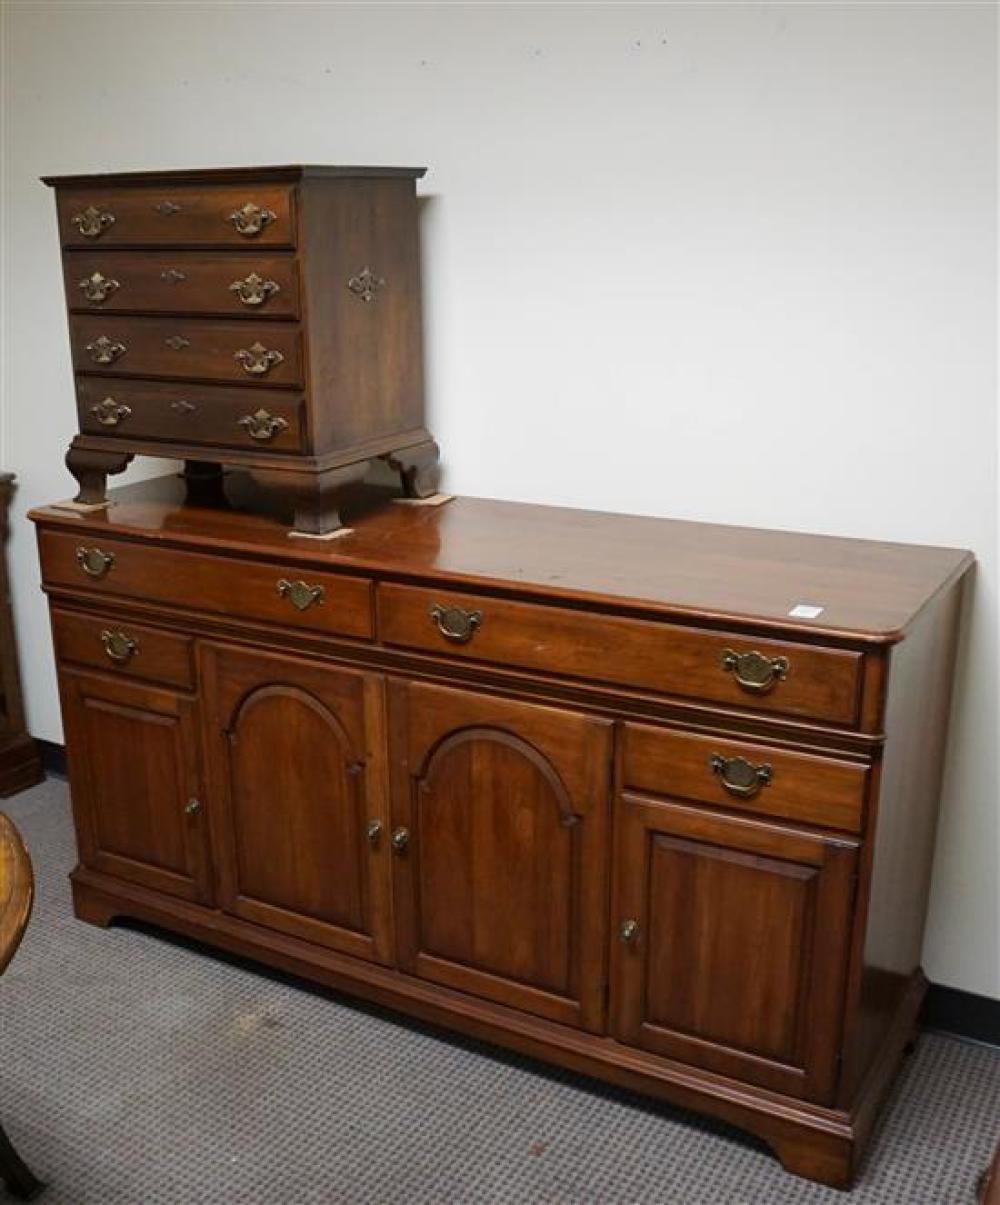 EARLY AMERICAN STYLE CHERRY SIDEBOARD 321733